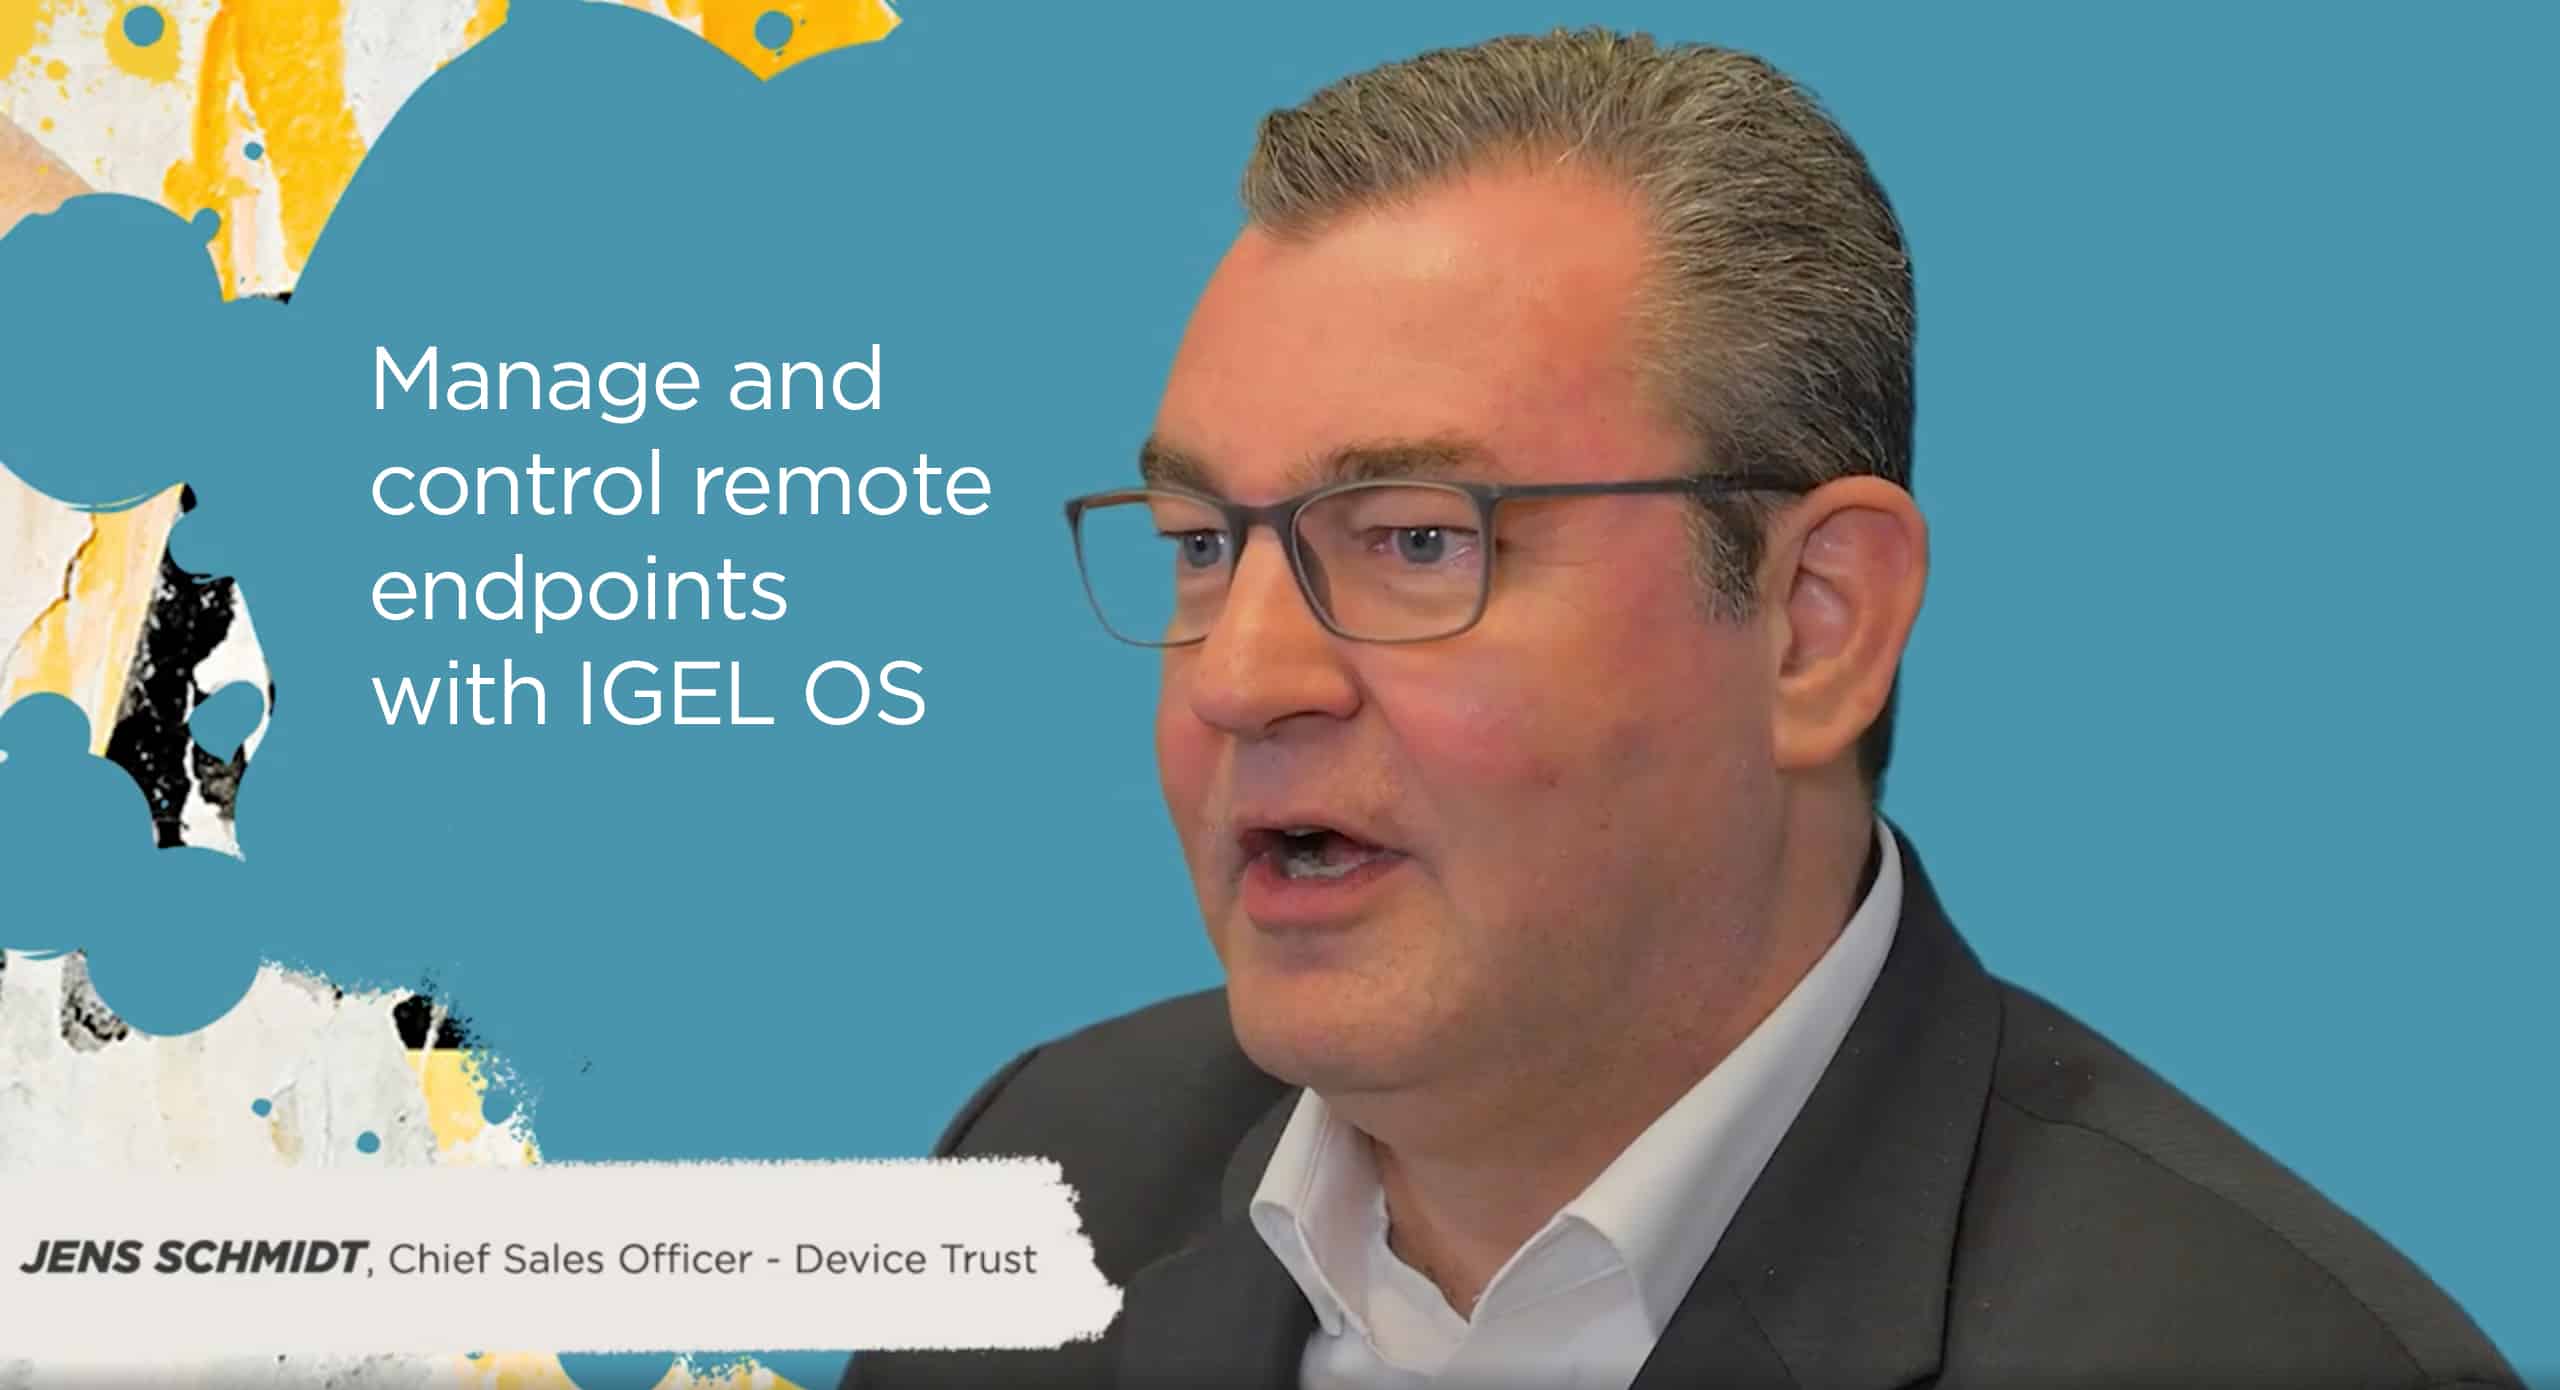 Manage and control remote endpoints with IGEL OS